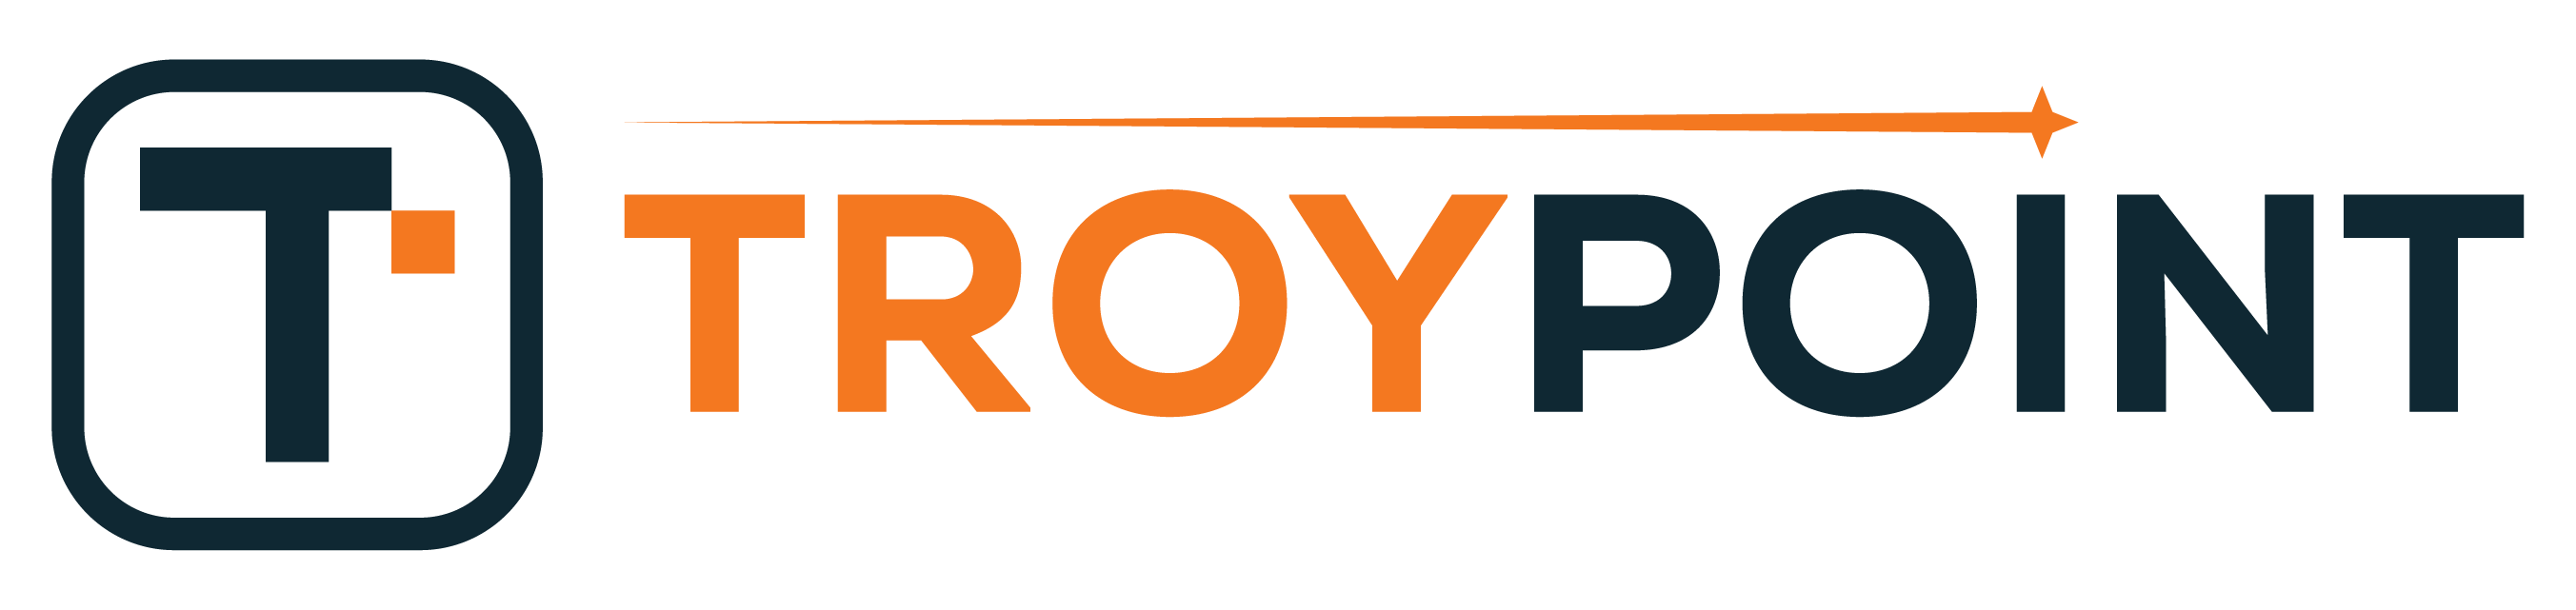 TROYPOINT